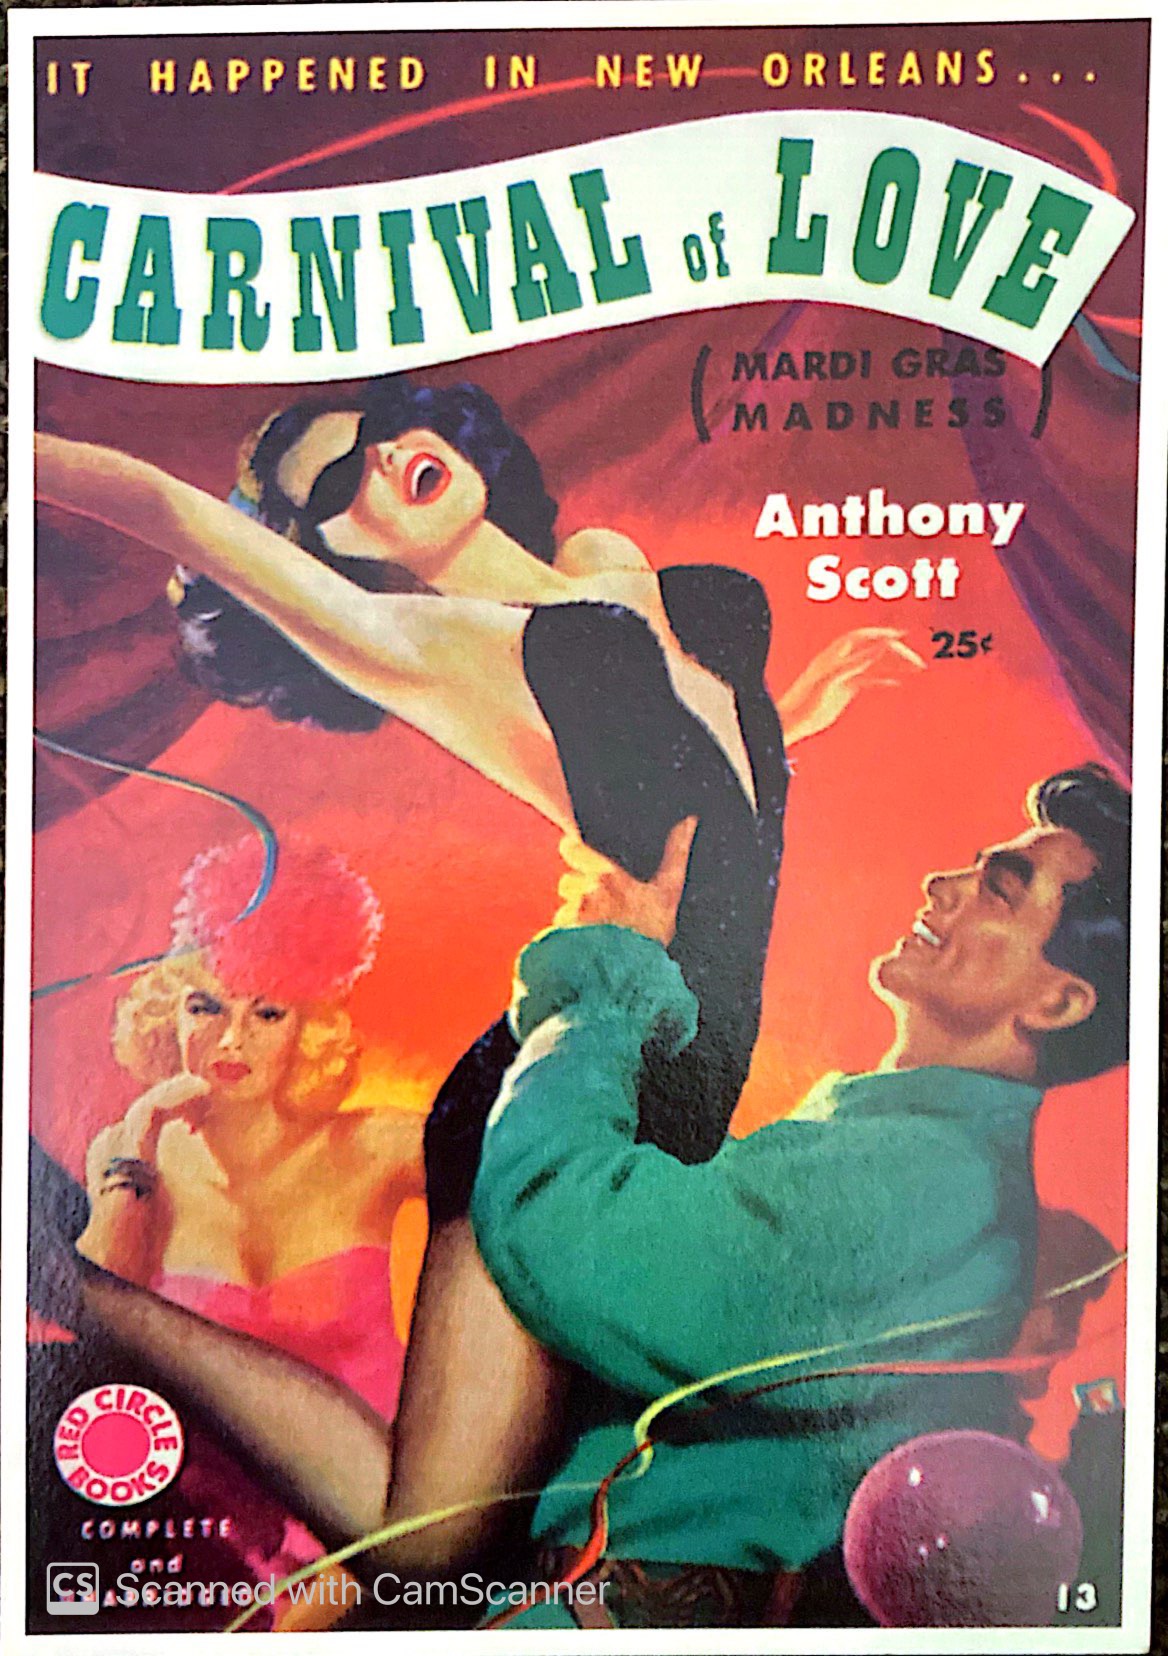 A vintage cover of the Carnival of Love, a woman is dancing with a man